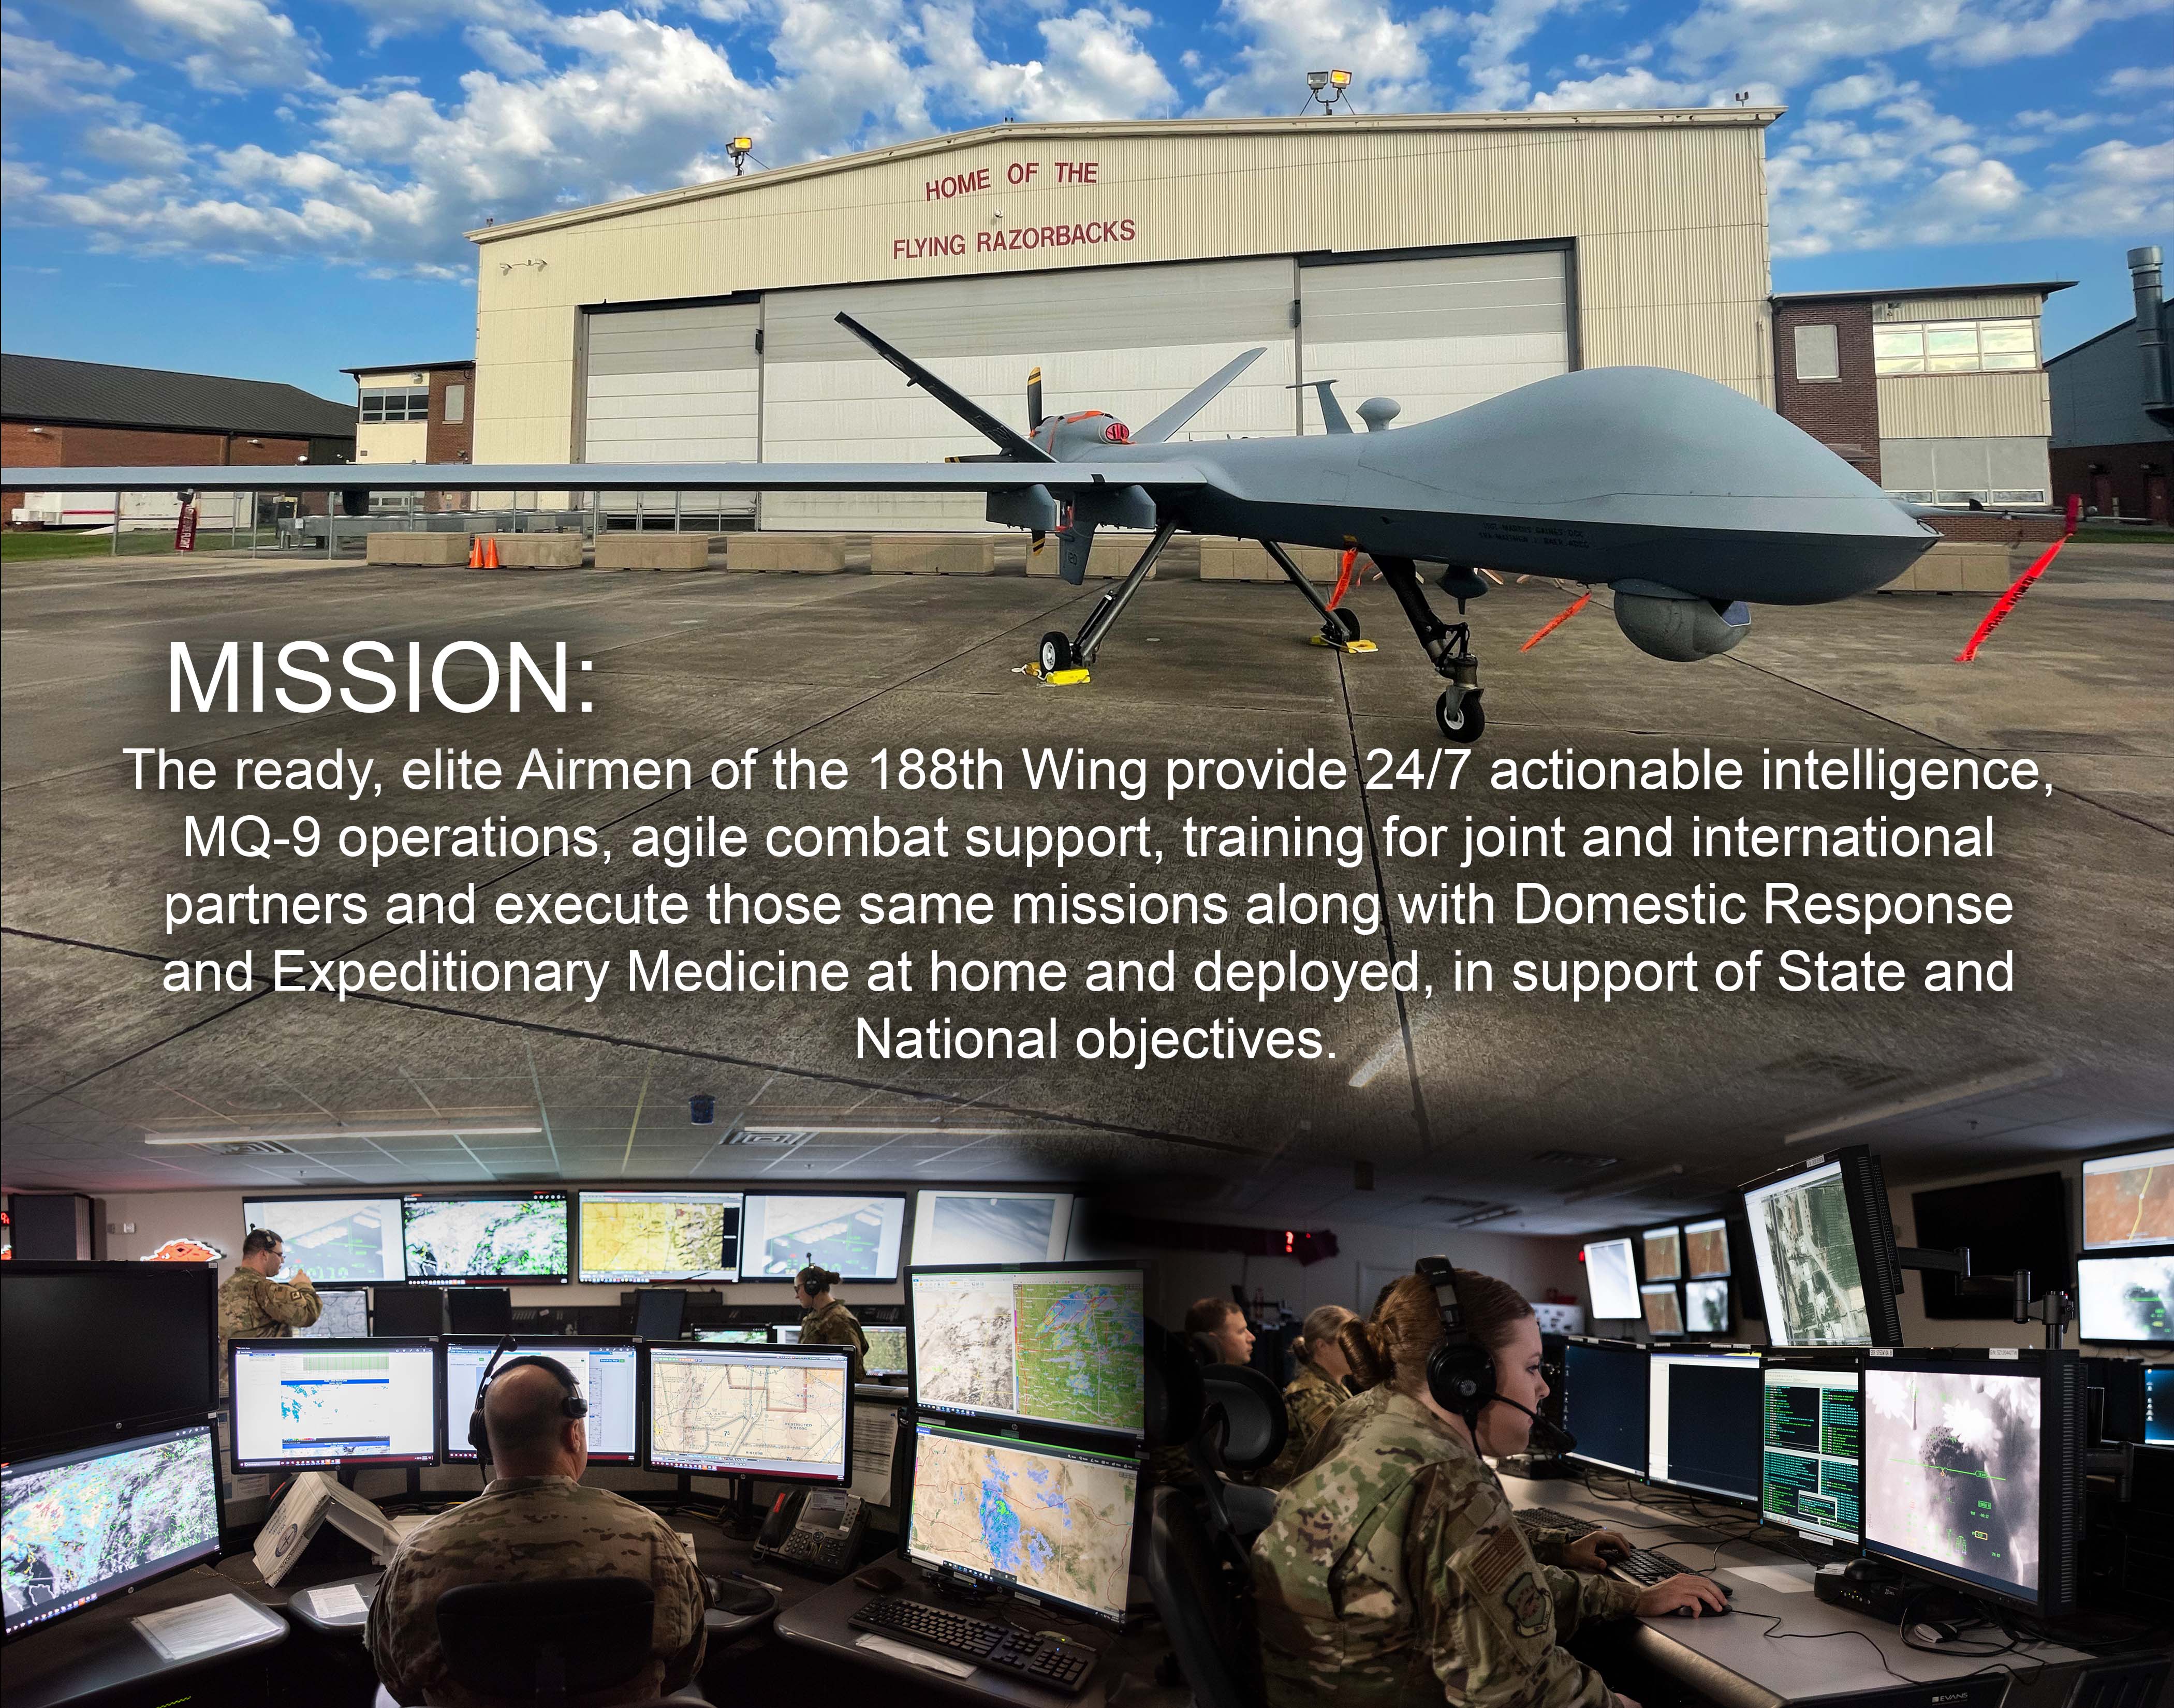 188th Wing Vision Poster with Airmen standing in portrait pose with the text "Empowering elite Airmen, passionate to serve, embracing a culture of Getting To Yes." in the center. 